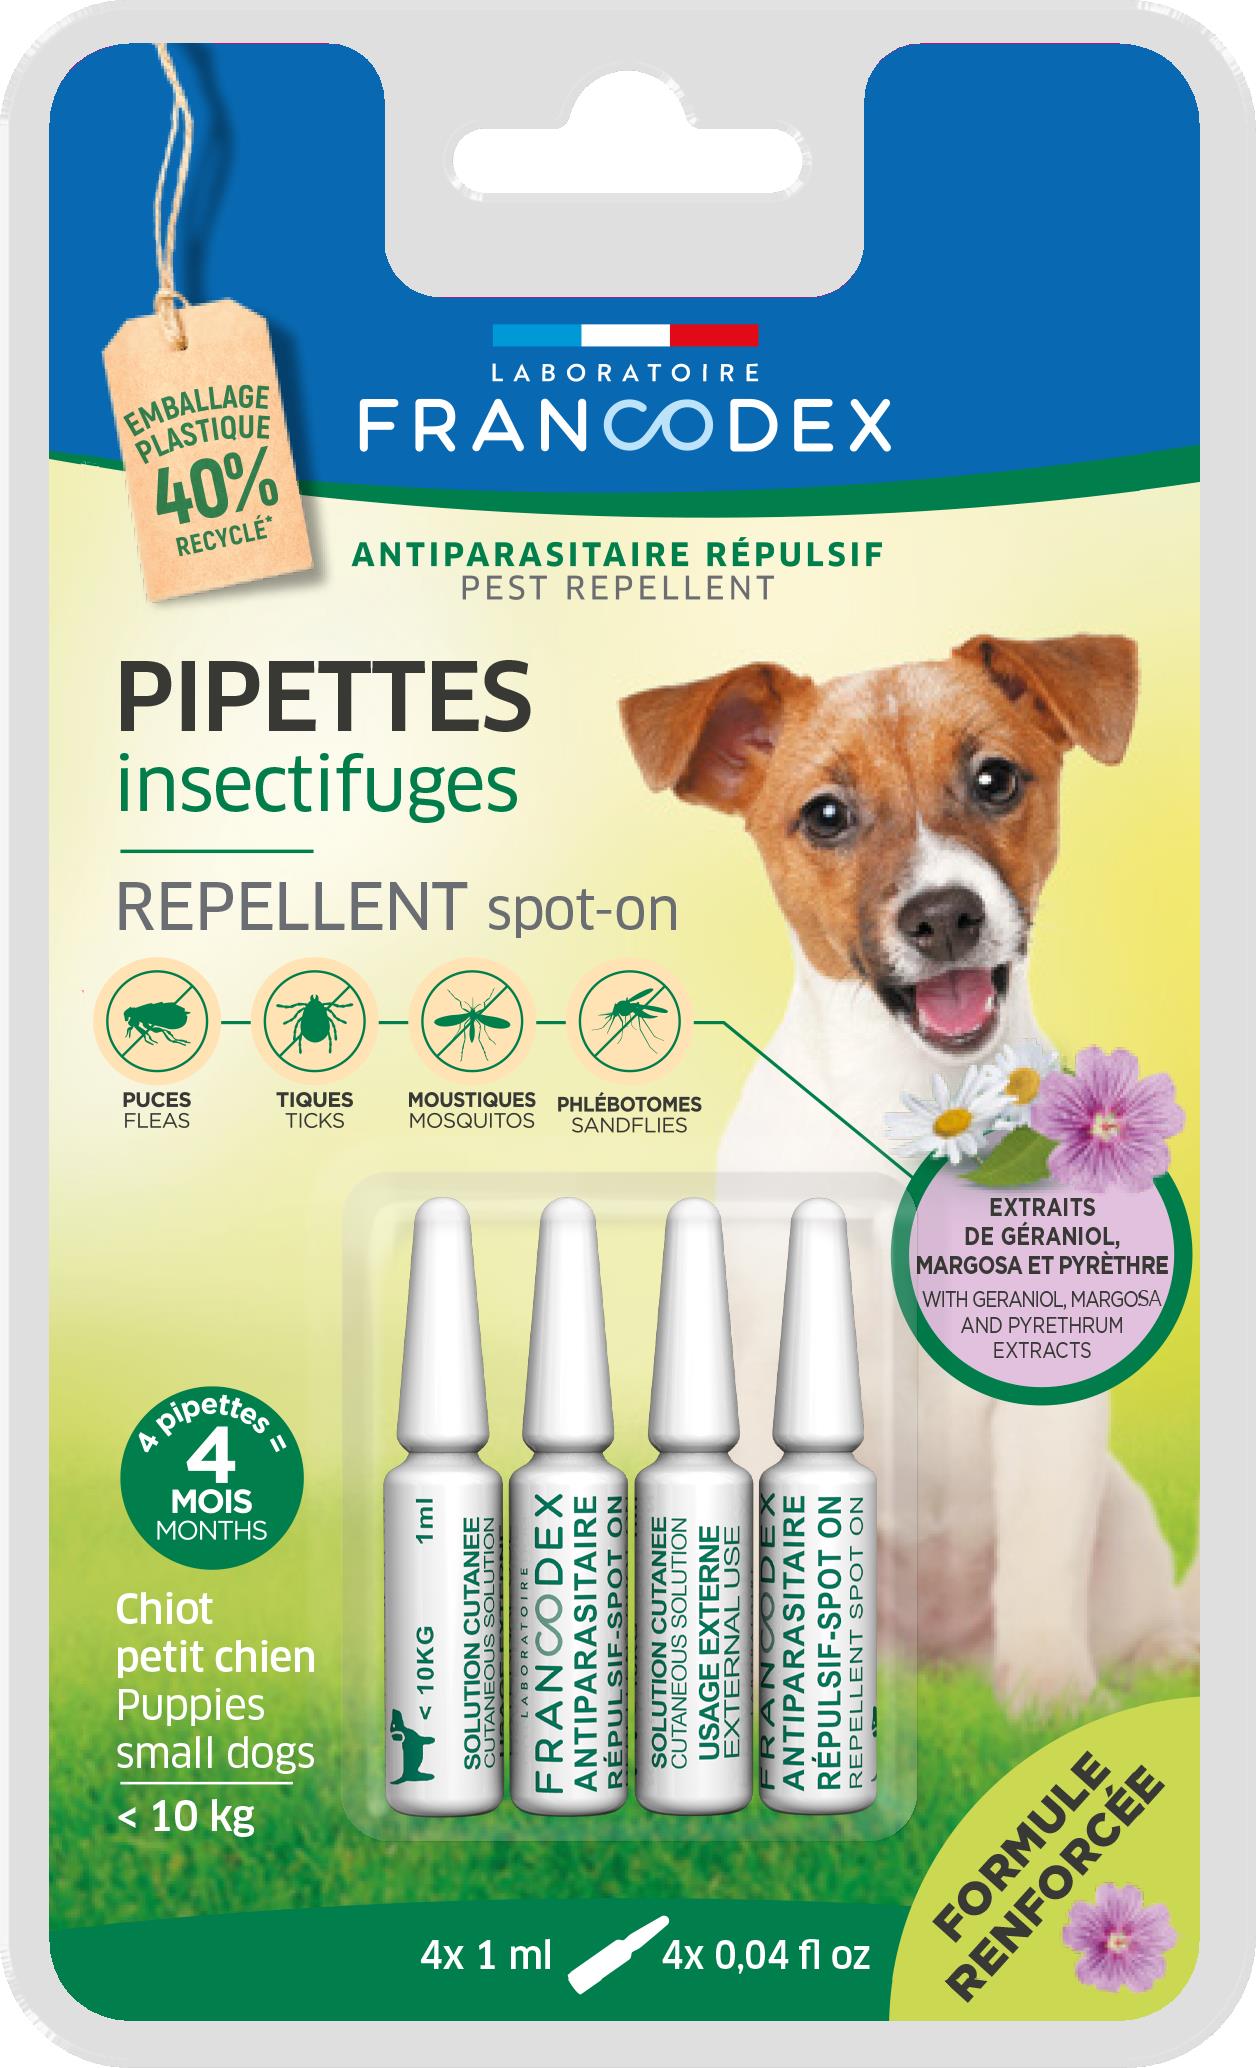 Soin Chien - Francodex Pipettes antiparasitaires insectifuges Chiots et petits chiens